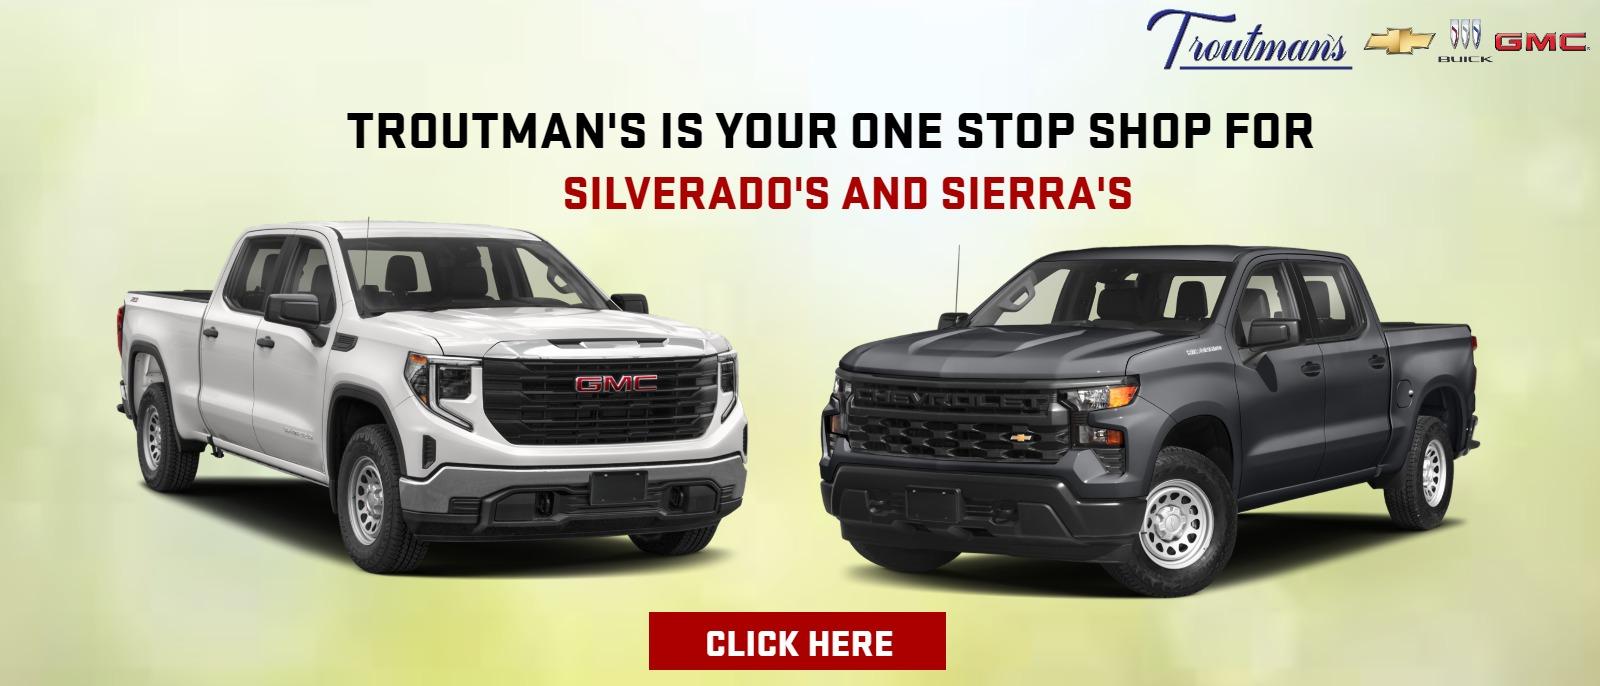 Troutman's is your One Stop Shop for Silverado's and Sierra's